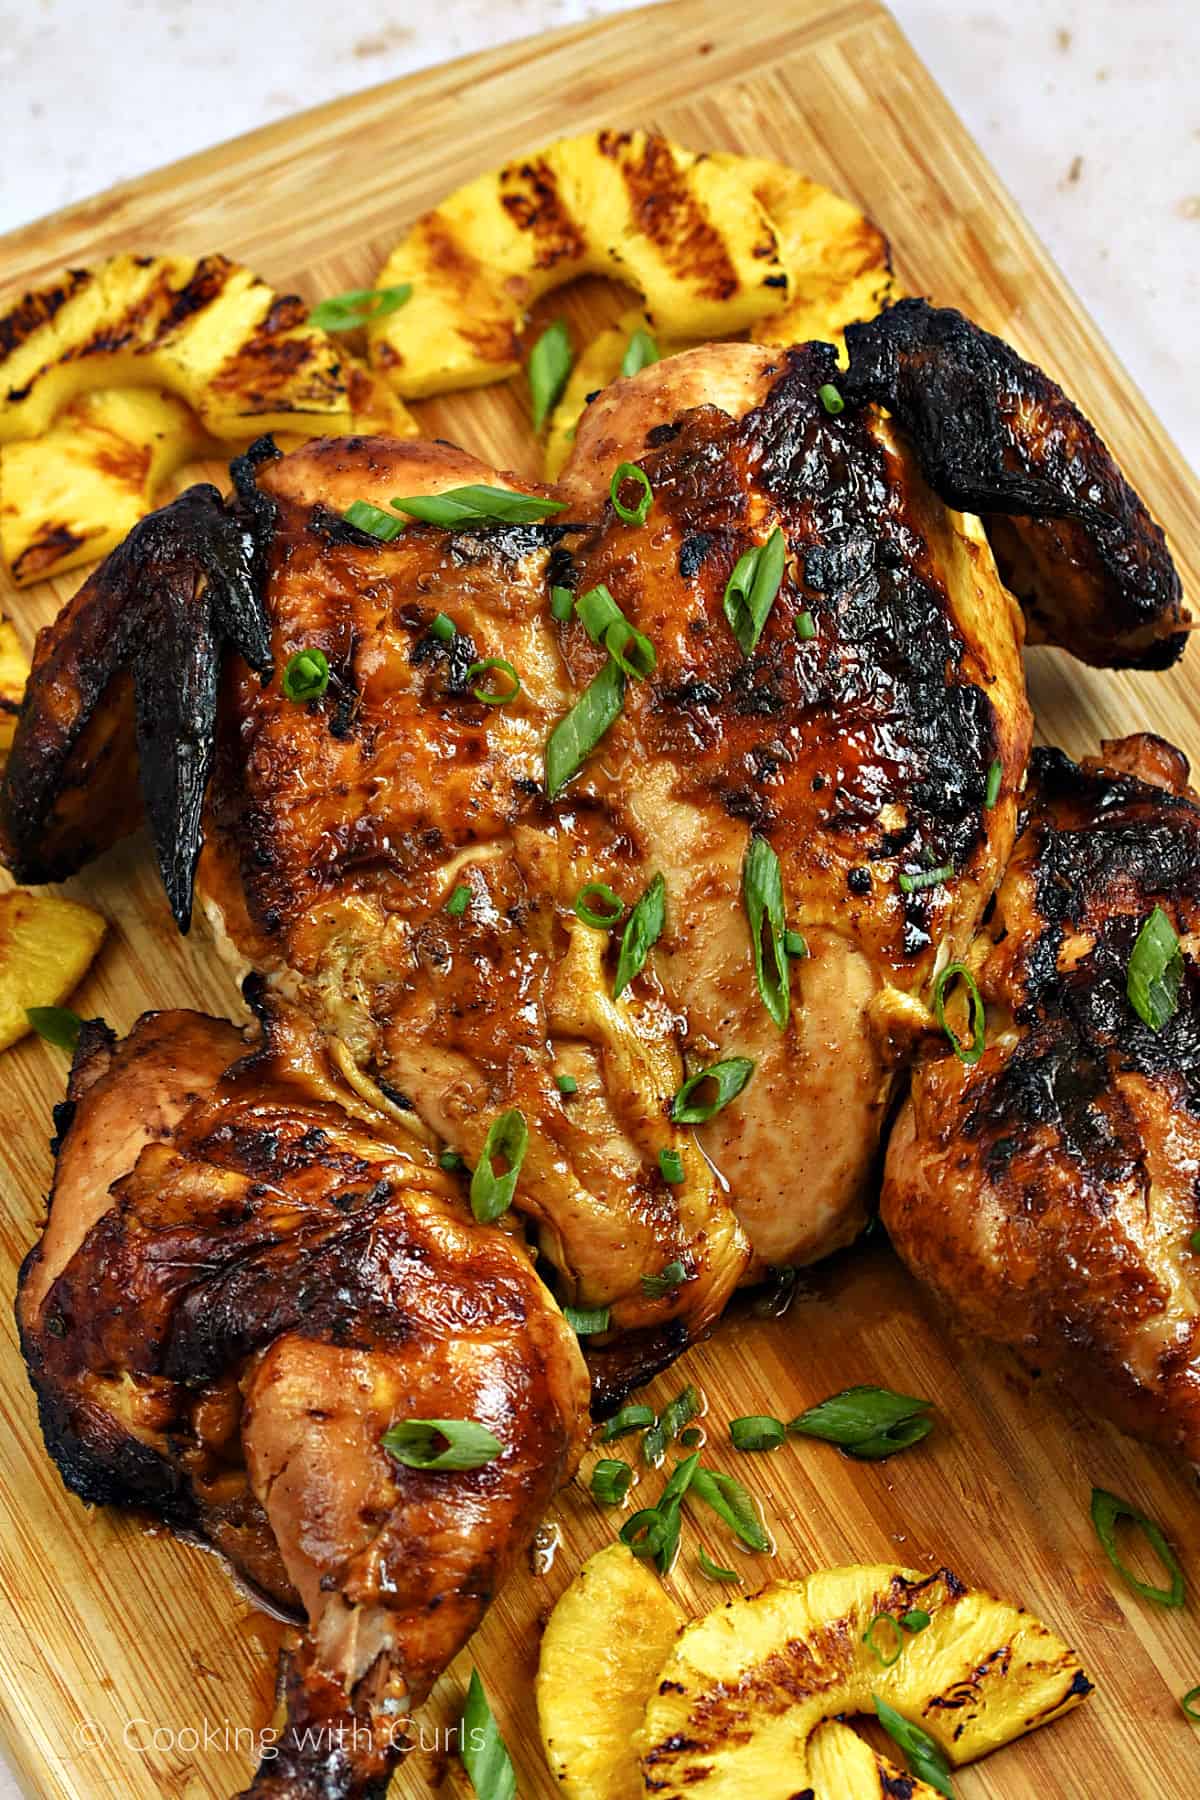 A whole grilled chicken on a wood board surrounded by grilled pineapple slices.